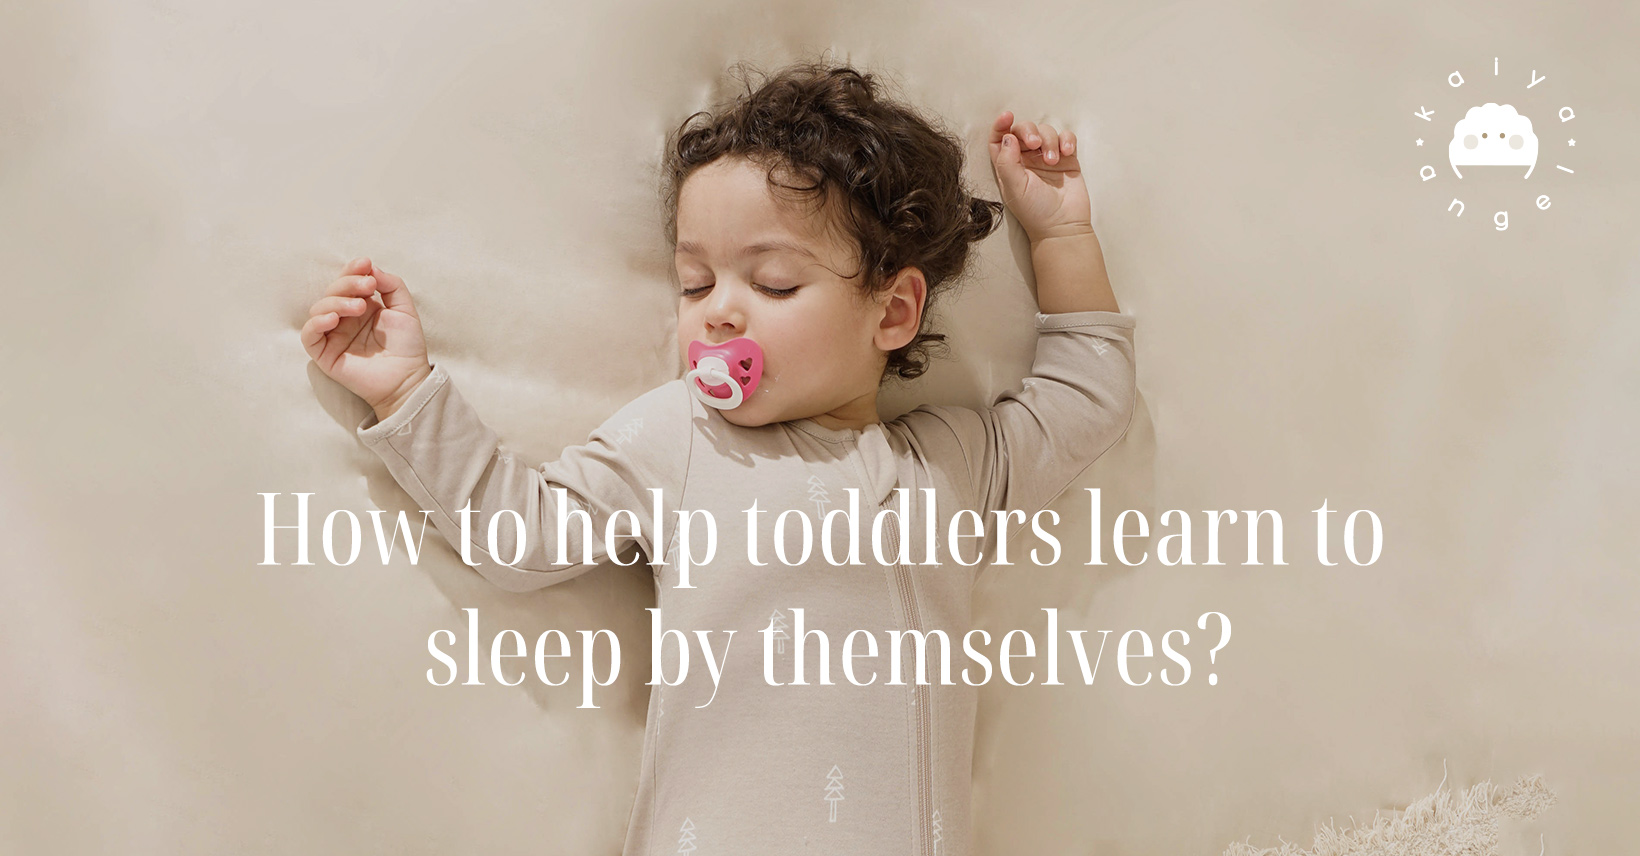 How to help toddlers learn to sleep by themselves? - News Anyway